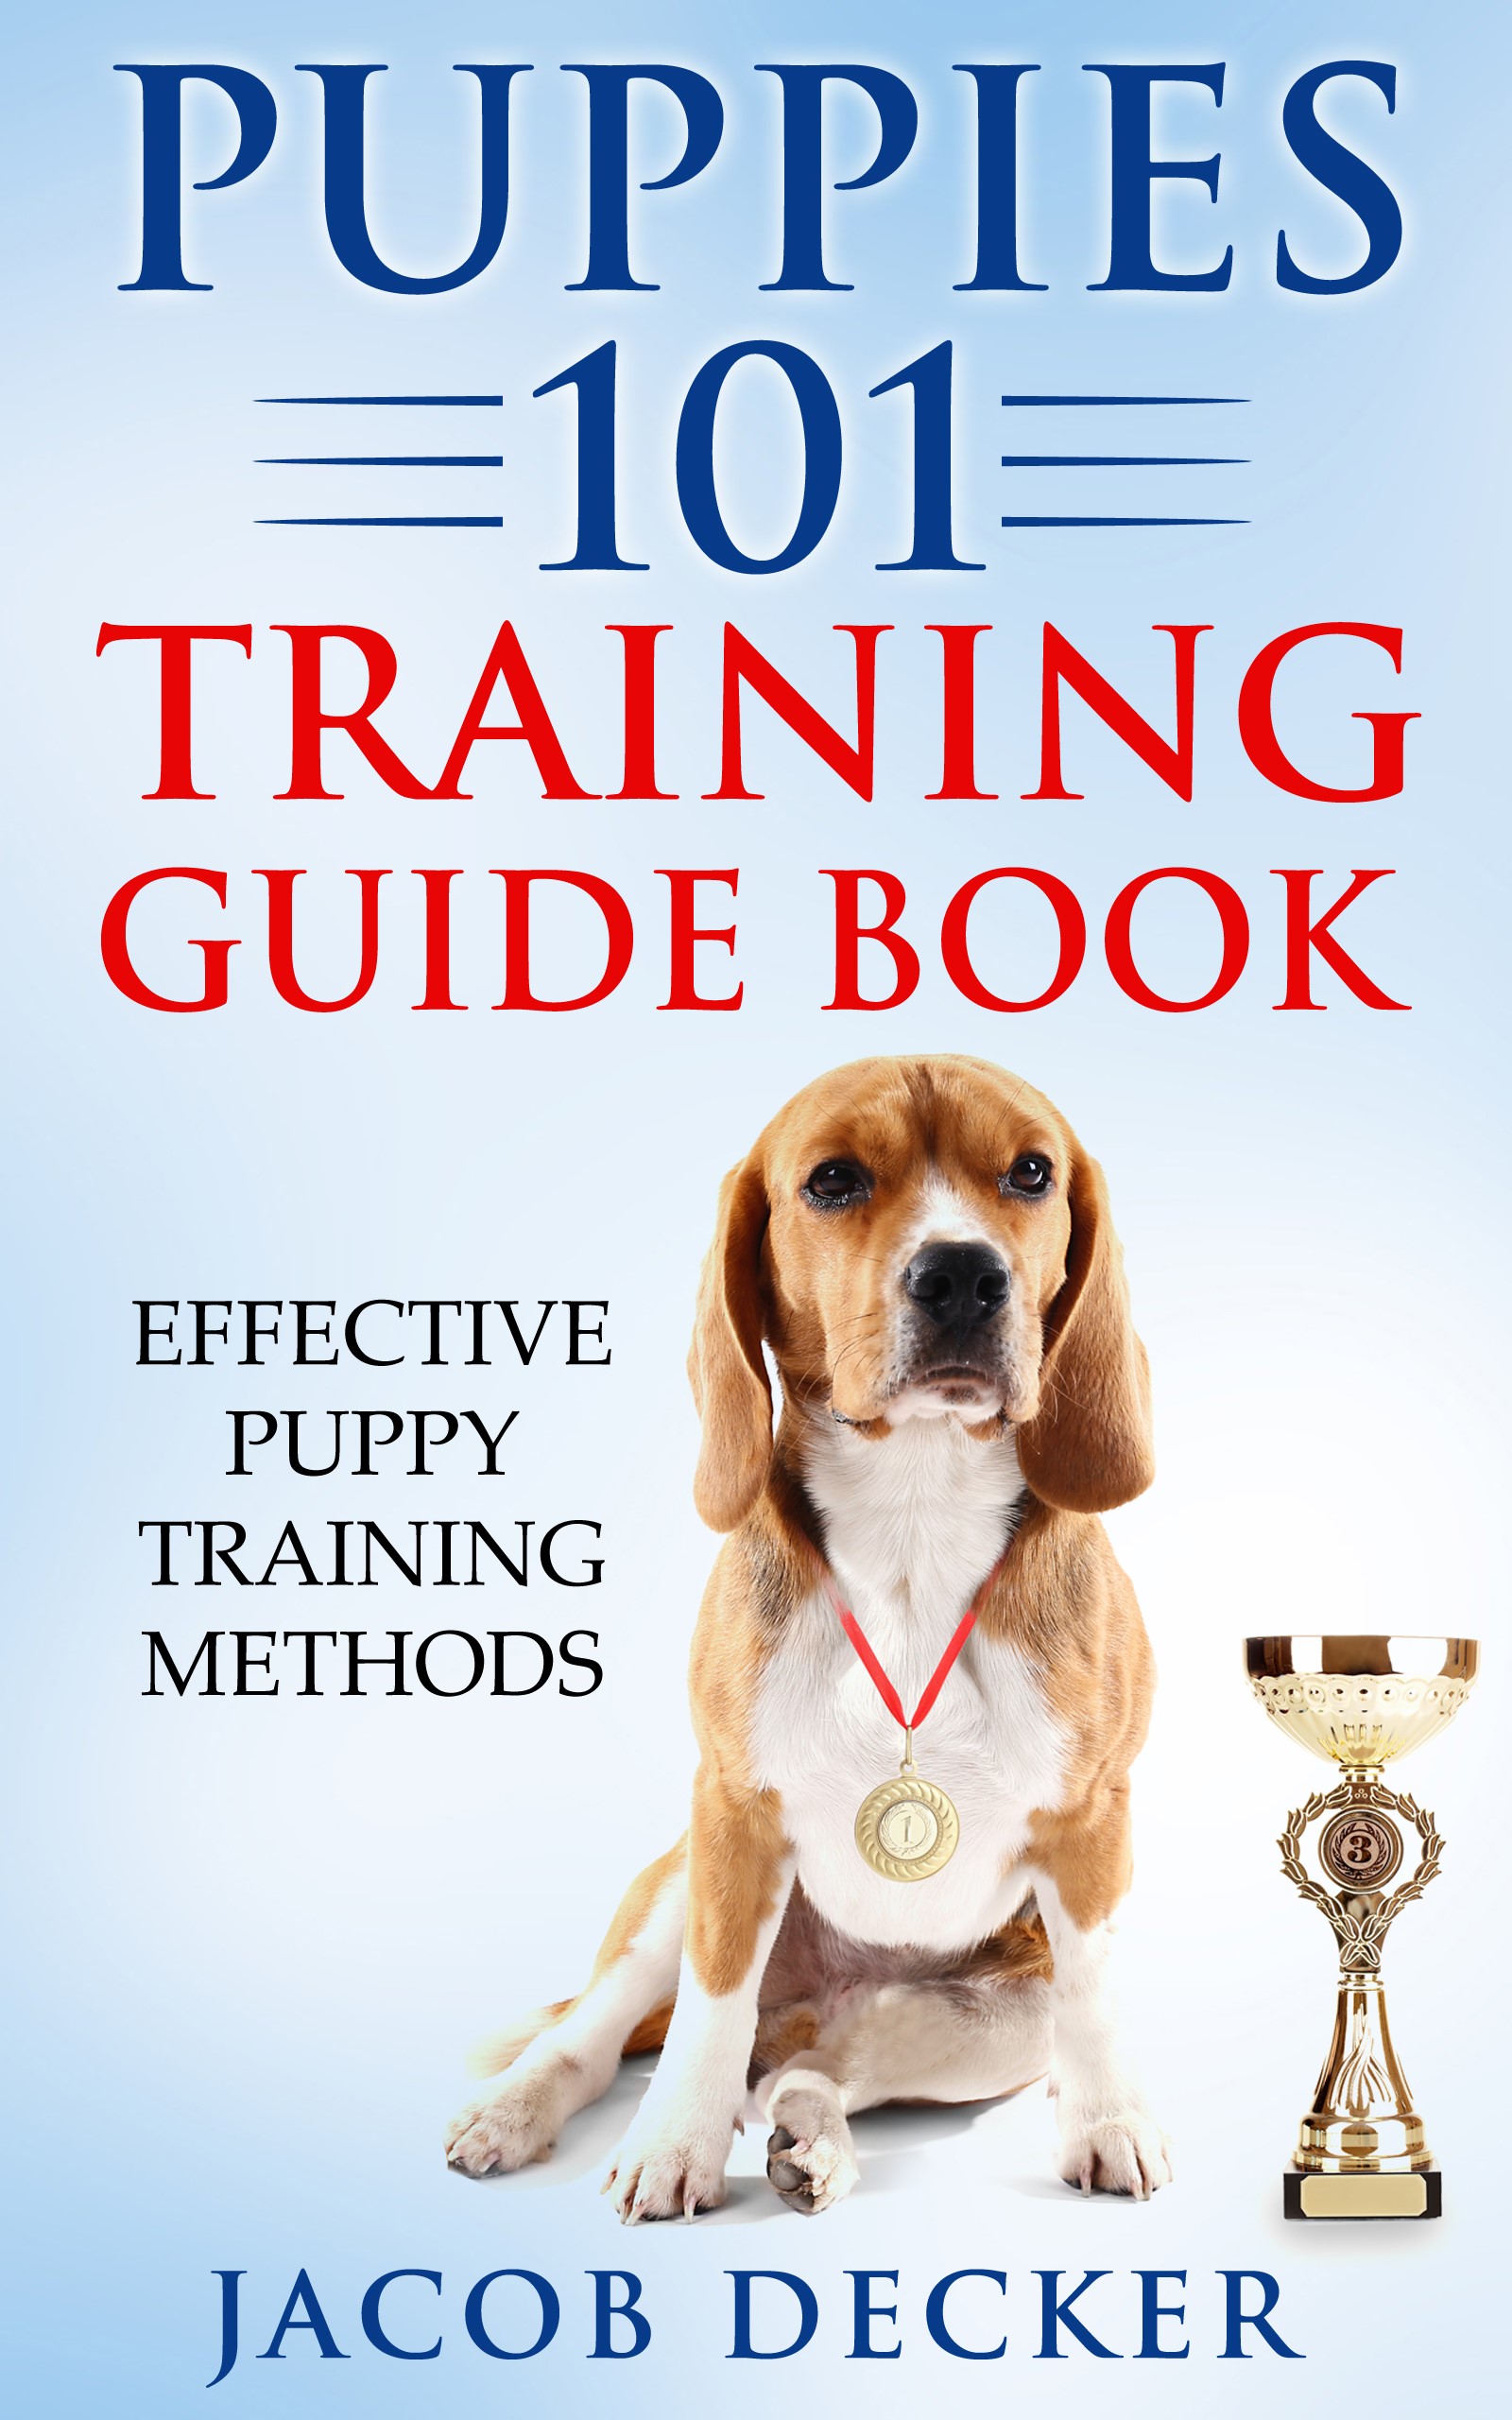 FREE: Puppies 101 Training  Guide Book by Jacob Decker